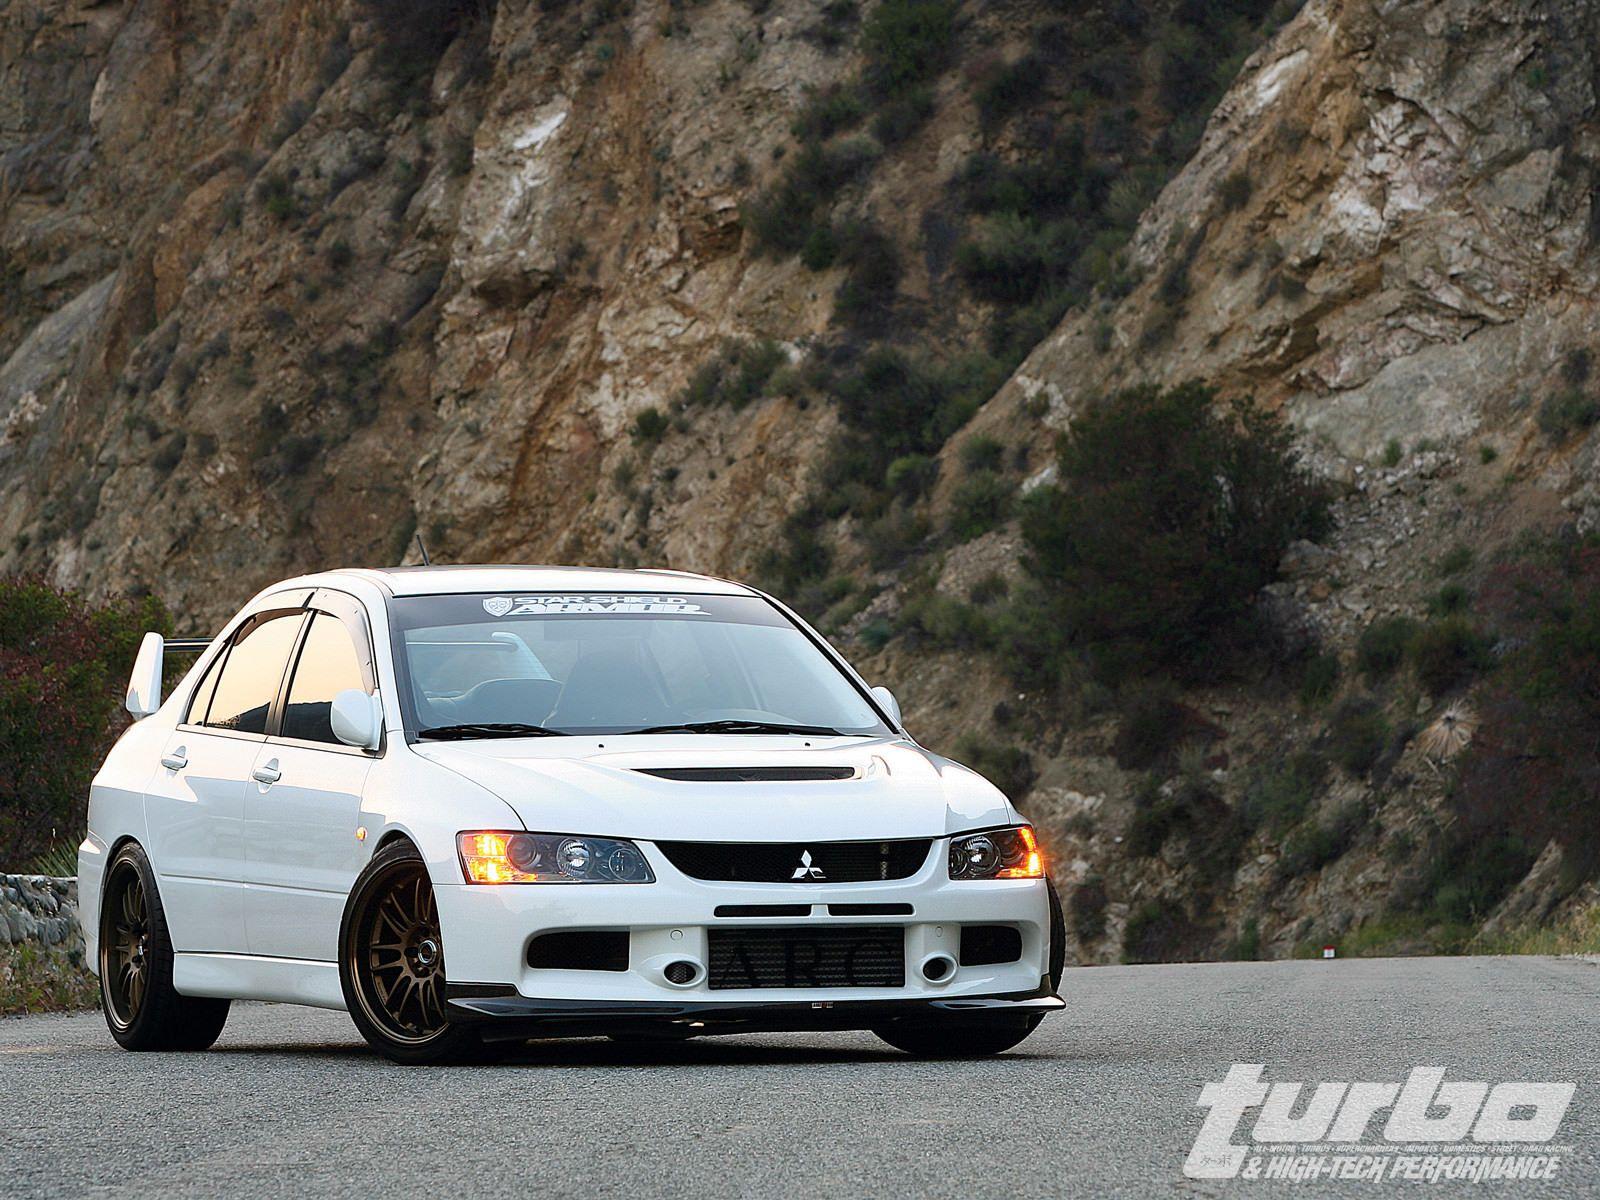 Evo 9 Wallpapers Top Free Evo 9 Backgrounds Wallpaperaccess